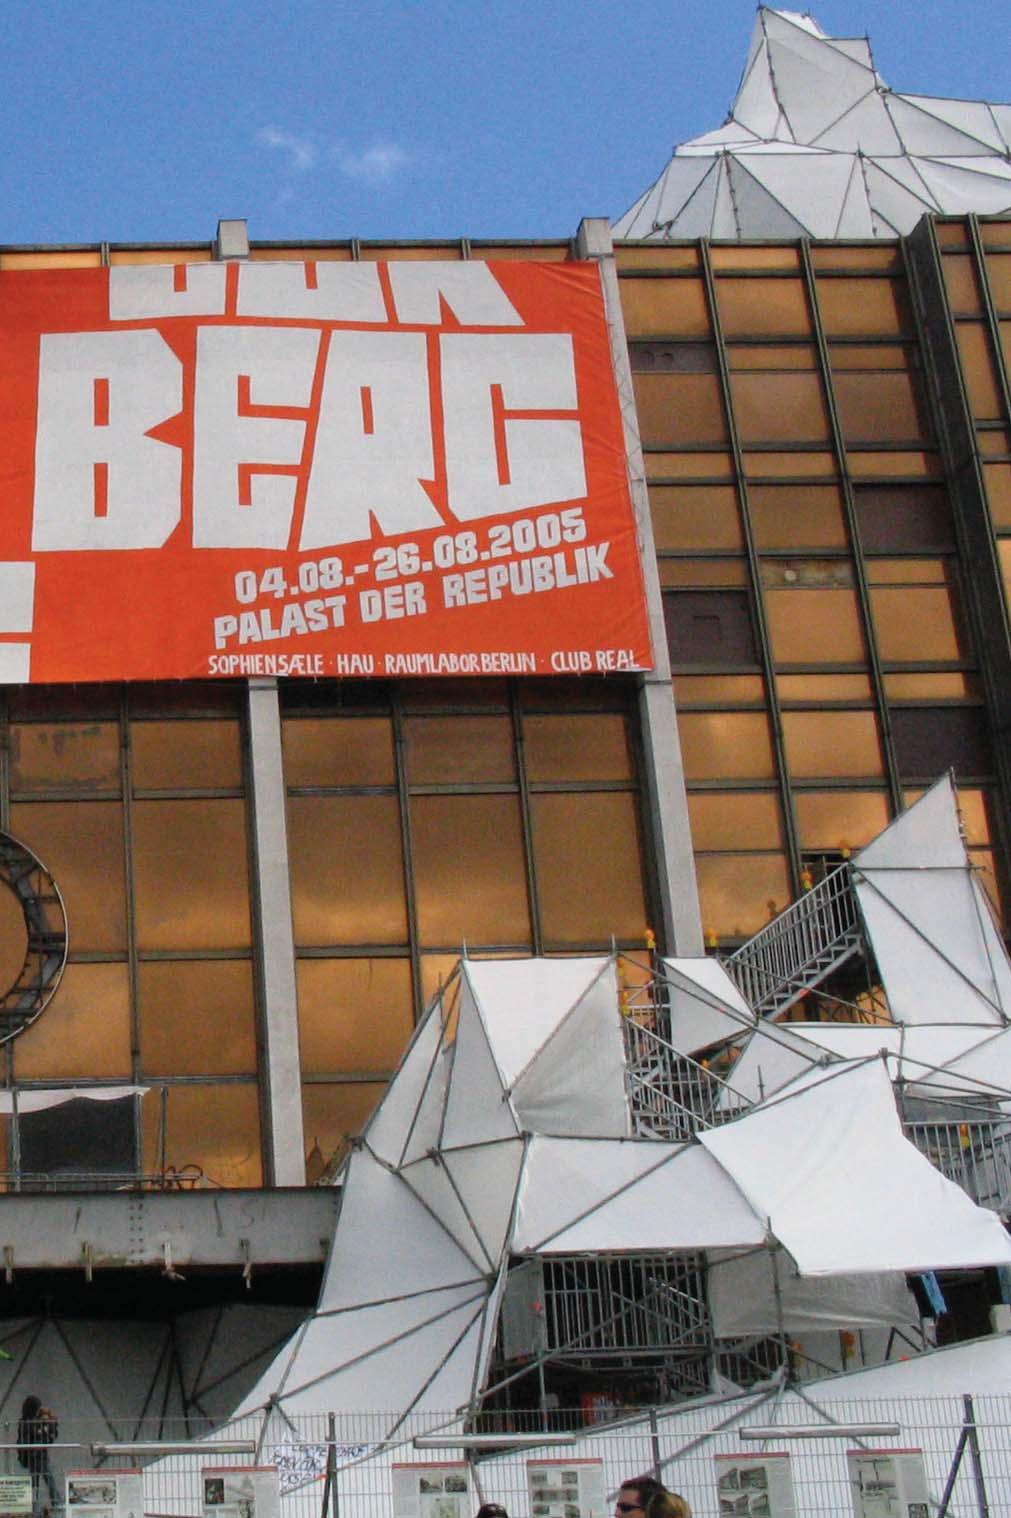 WHY BERLIN? HISTORIC ROLE AS URBAN DESIGN LABORATORY Throughout its recent history Berlin has served as a laboratory and center for emerging urban design and culture.